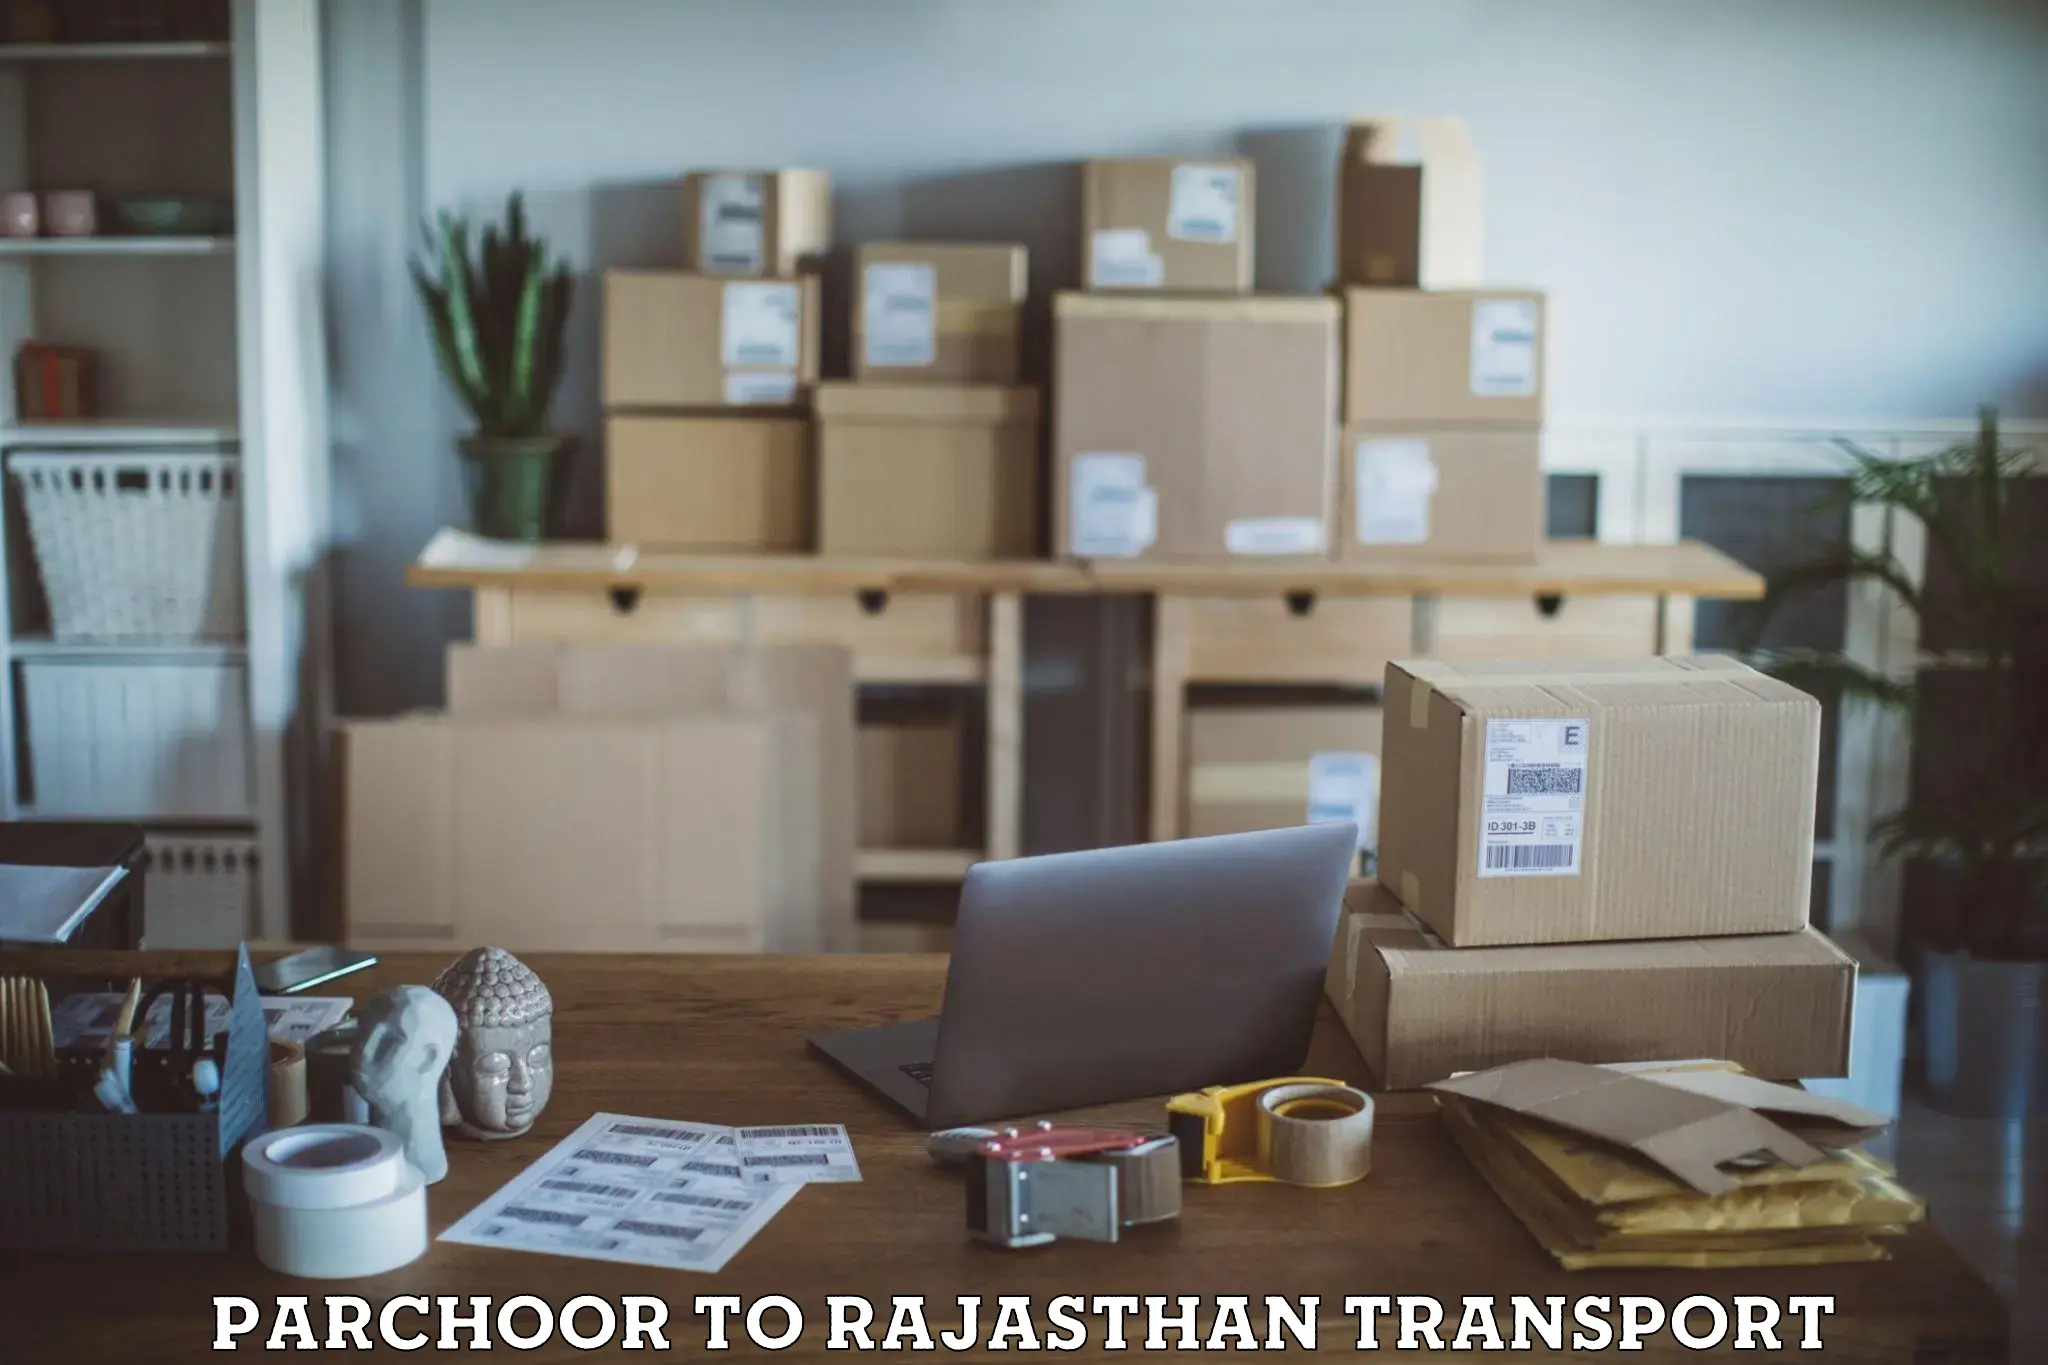 Material transport services Parchoor to Rajasthan